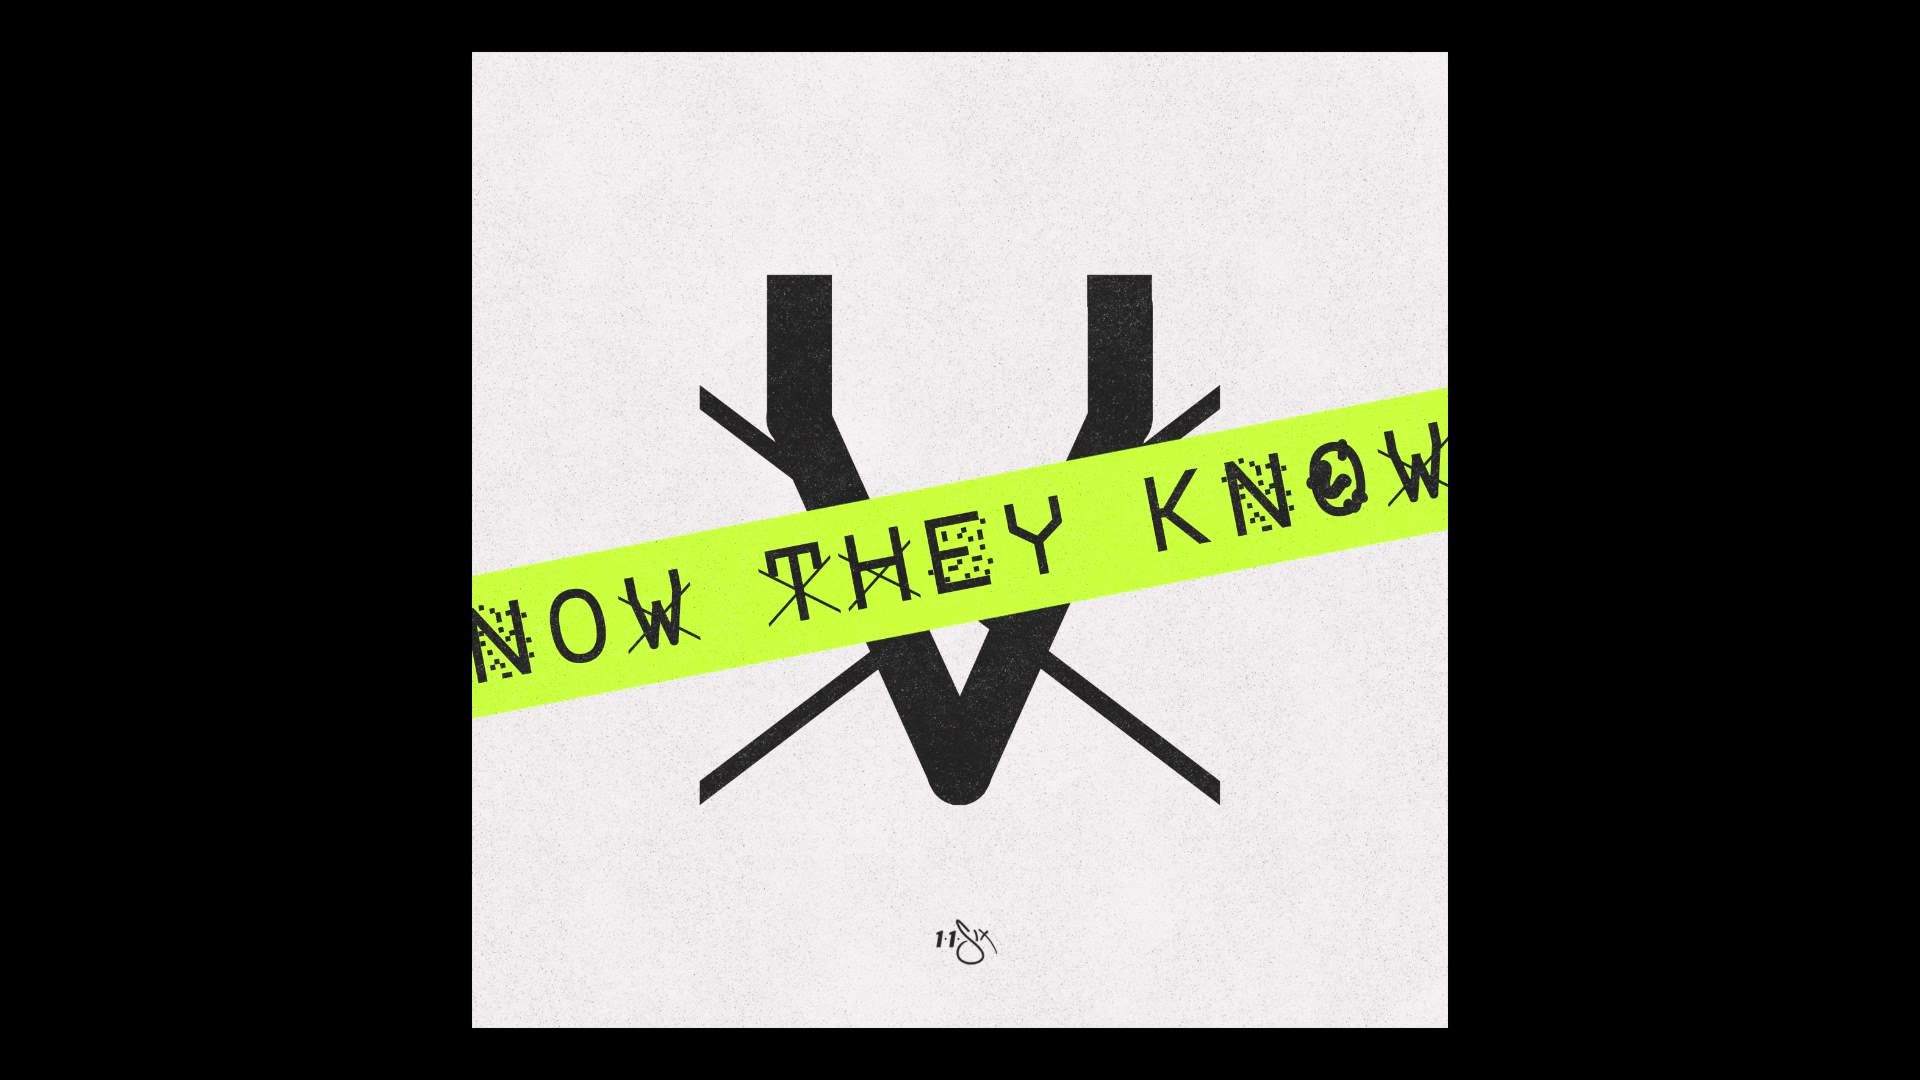 1920x1080 116 - Now They Know - Unashamed V Tour Single (@reachrecords) - YouTube